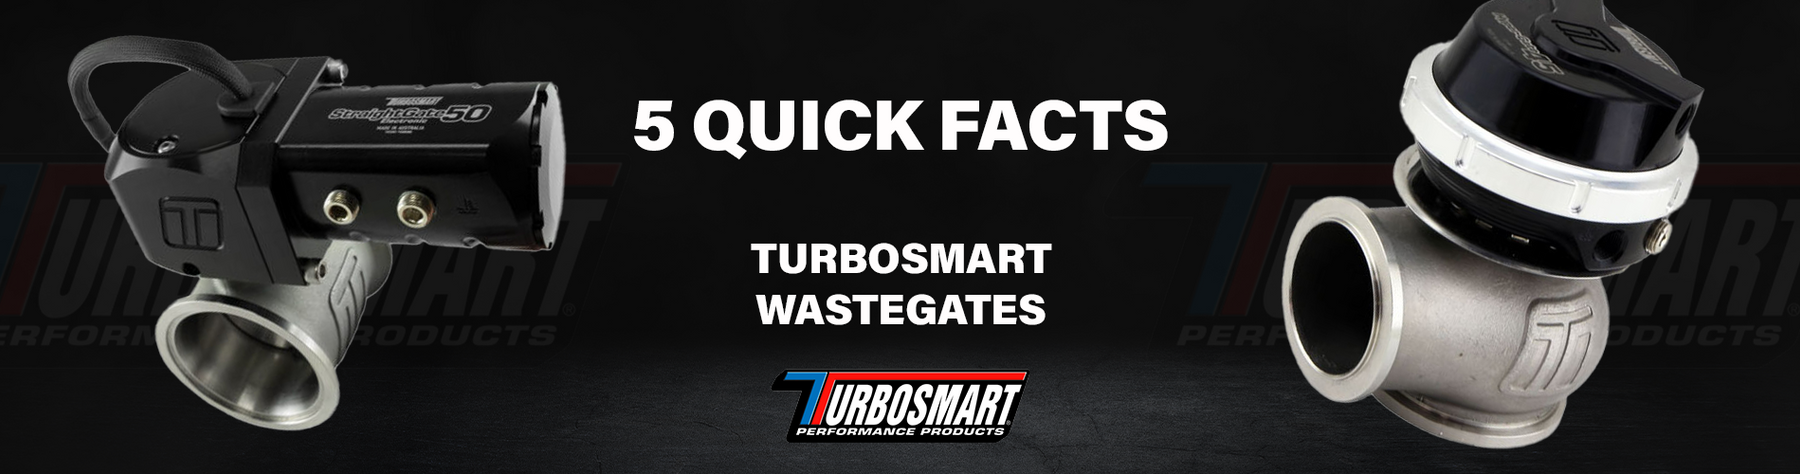 5 'Quick Facts' about Turbosmart Wastegates